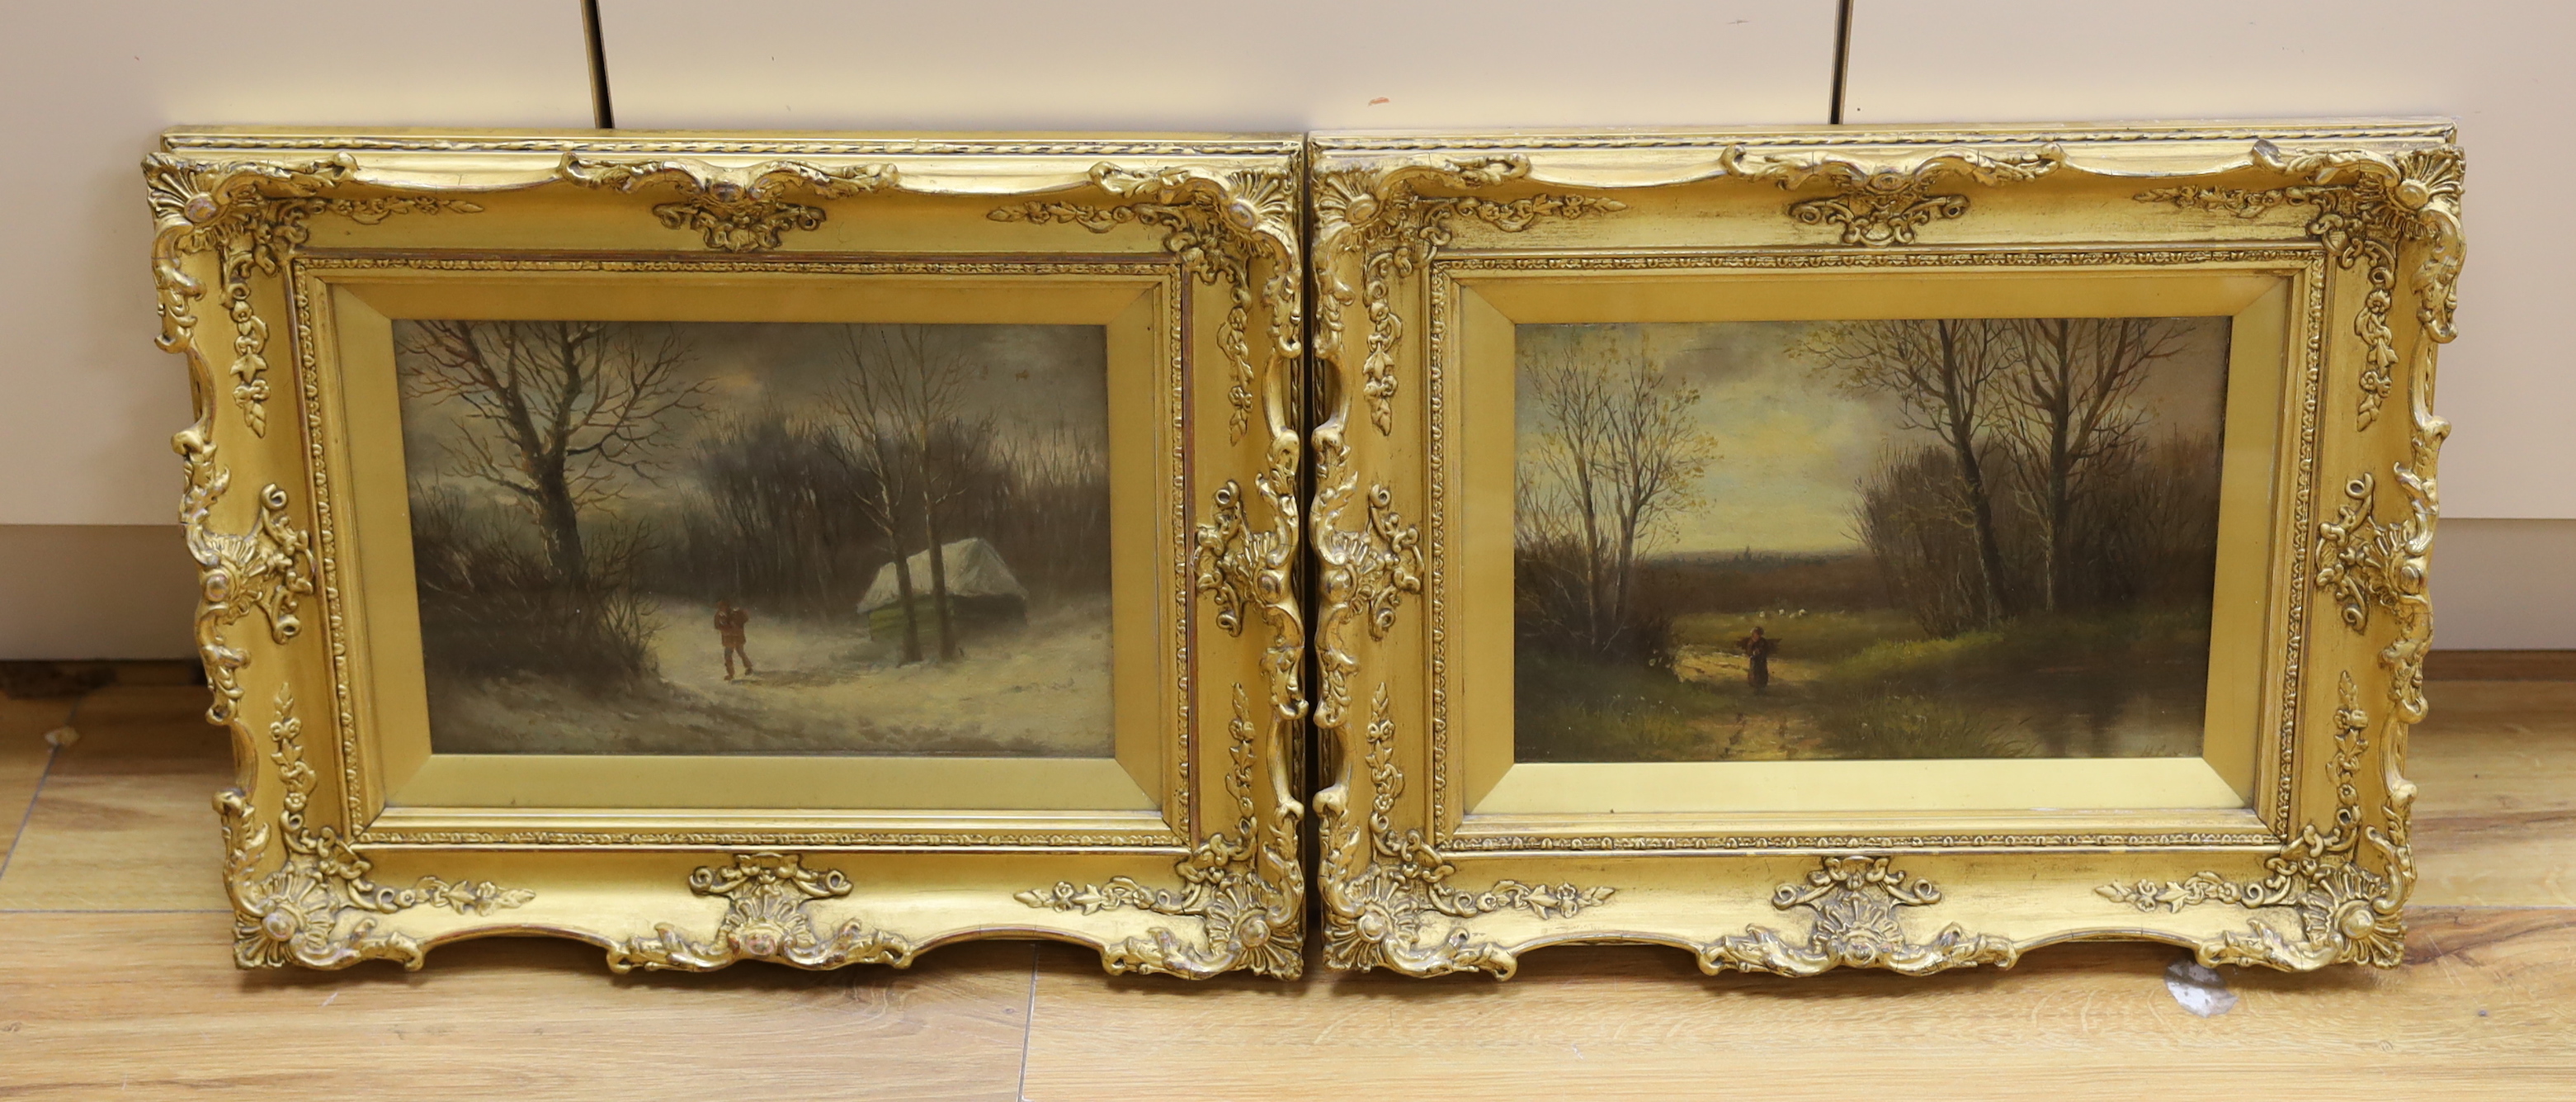 H.Cox (19th. C), pair of oils on canvas, Rural landscapes with figures on pathways, each signed, 19 x 29cm, ornate gilt frames